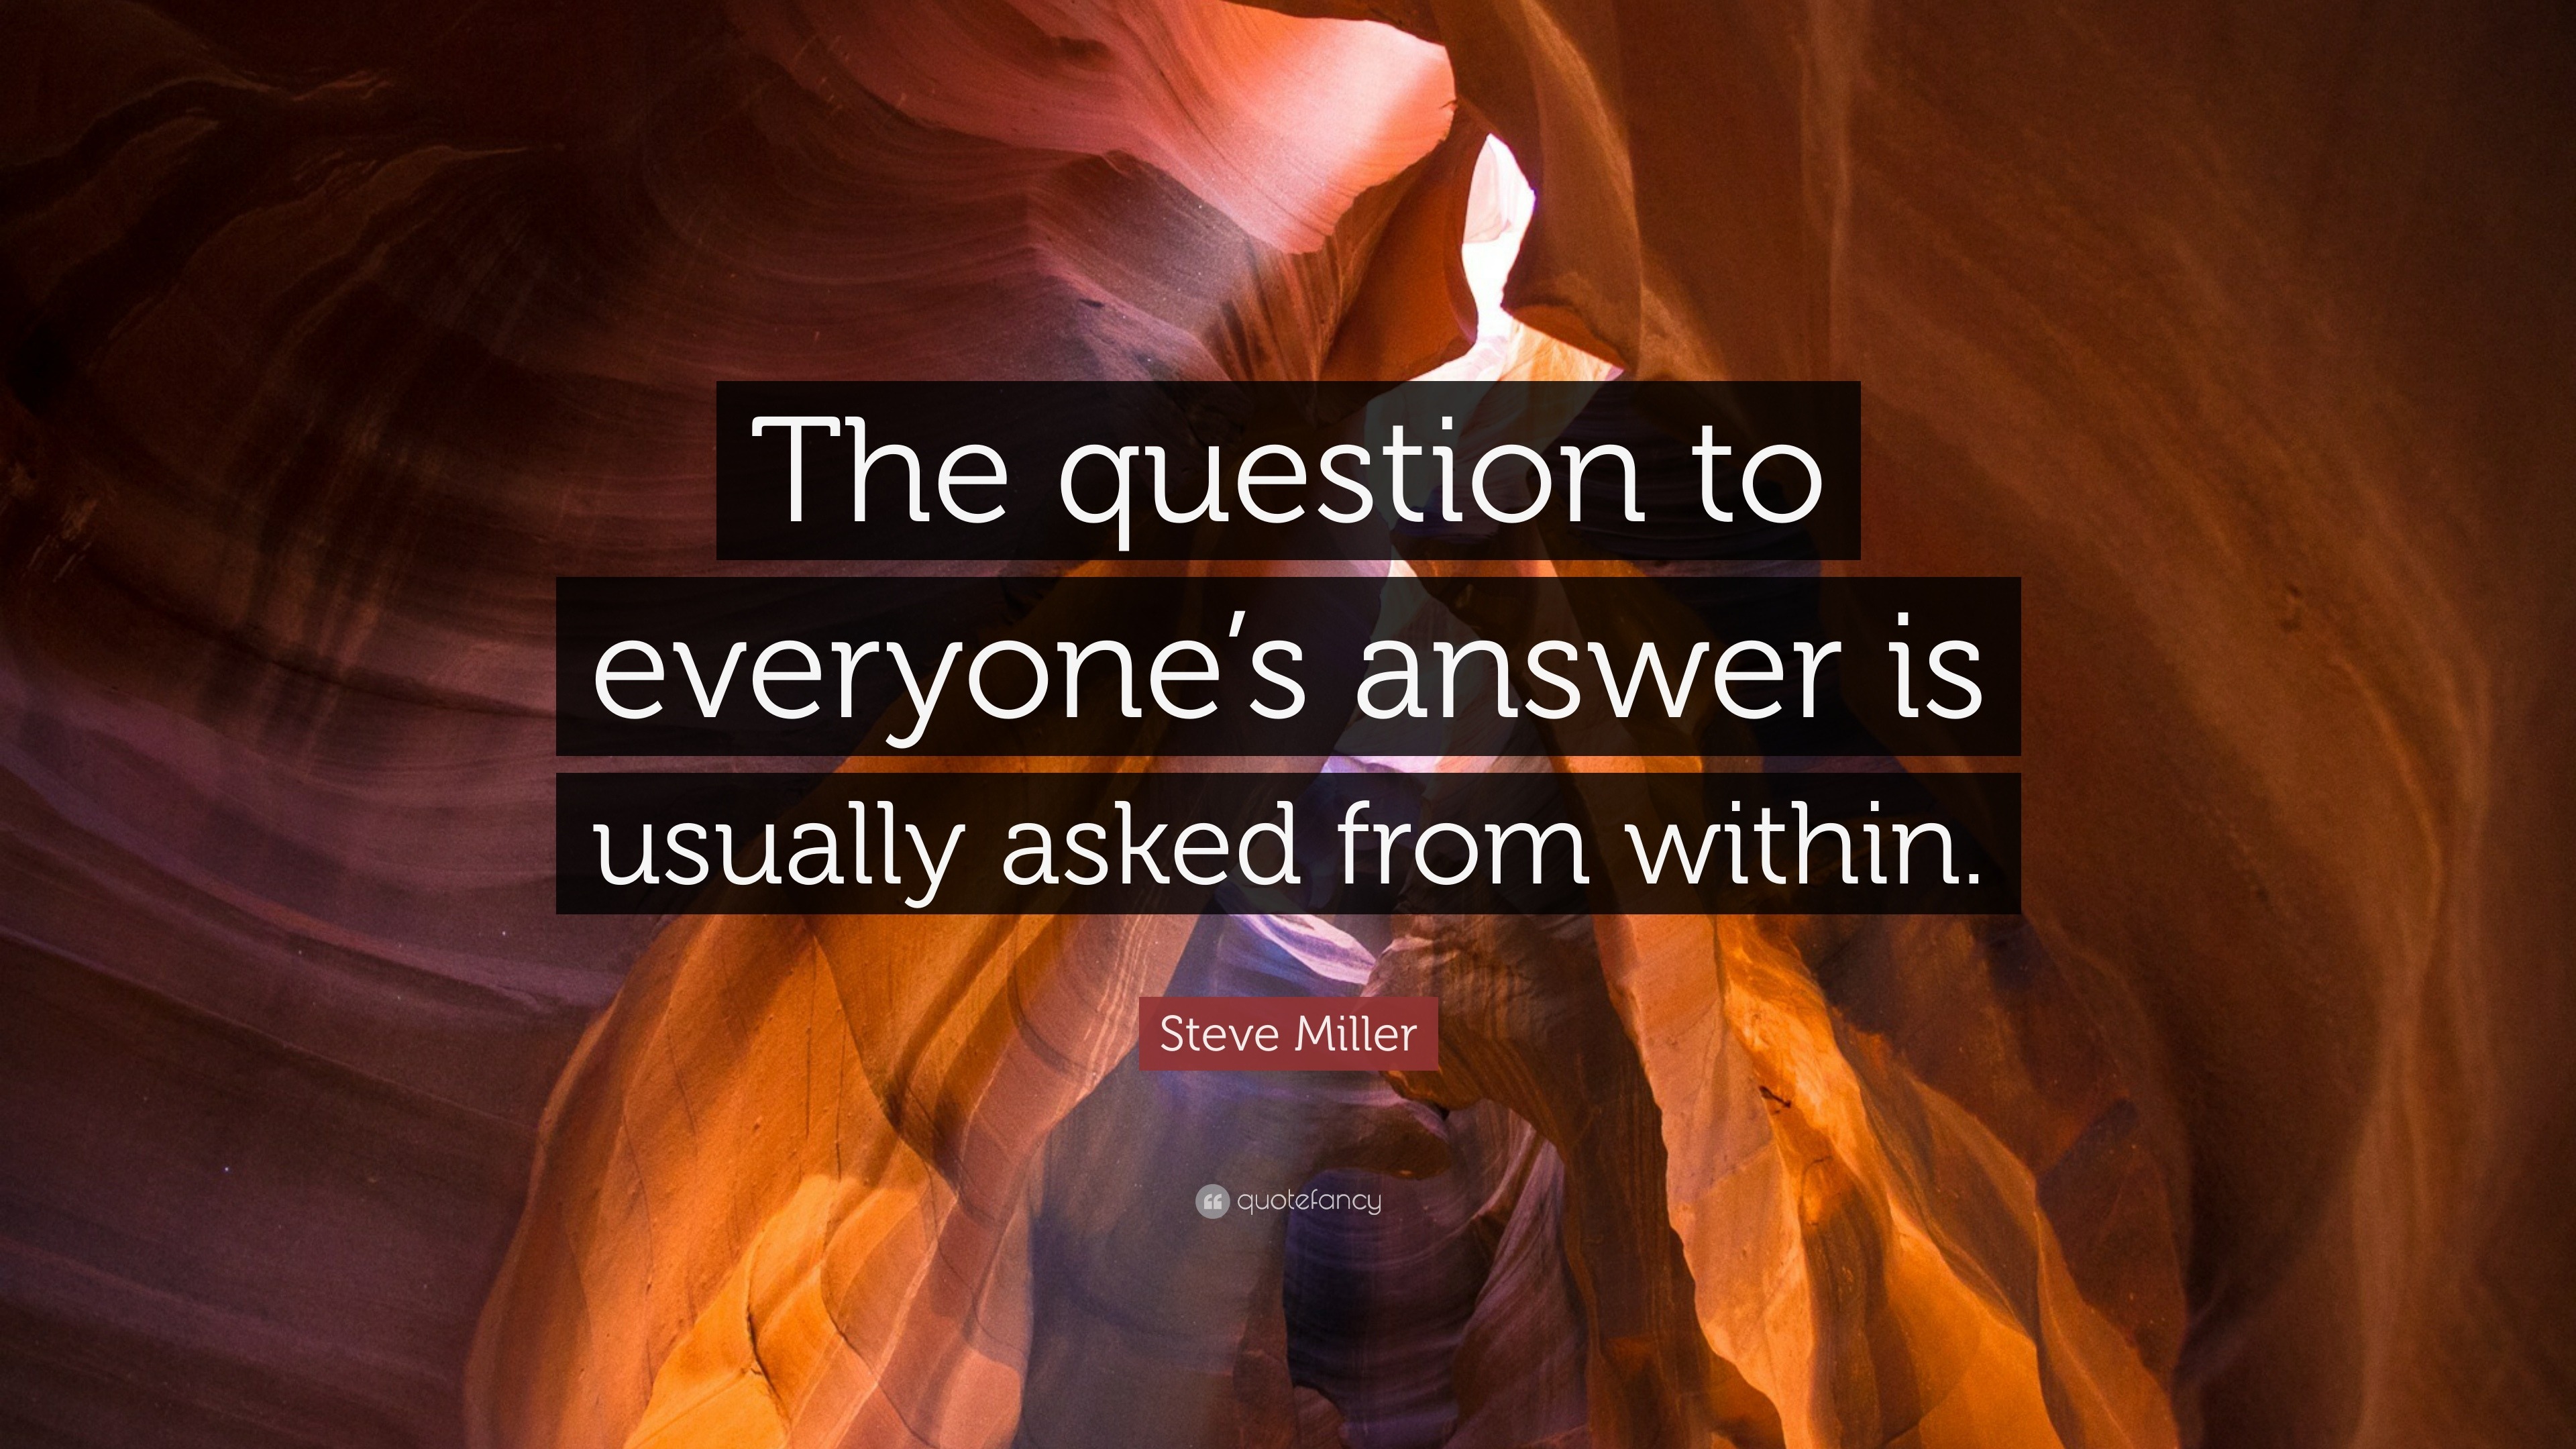 Steve Miller Quote: “The question to everyone's answer is usually